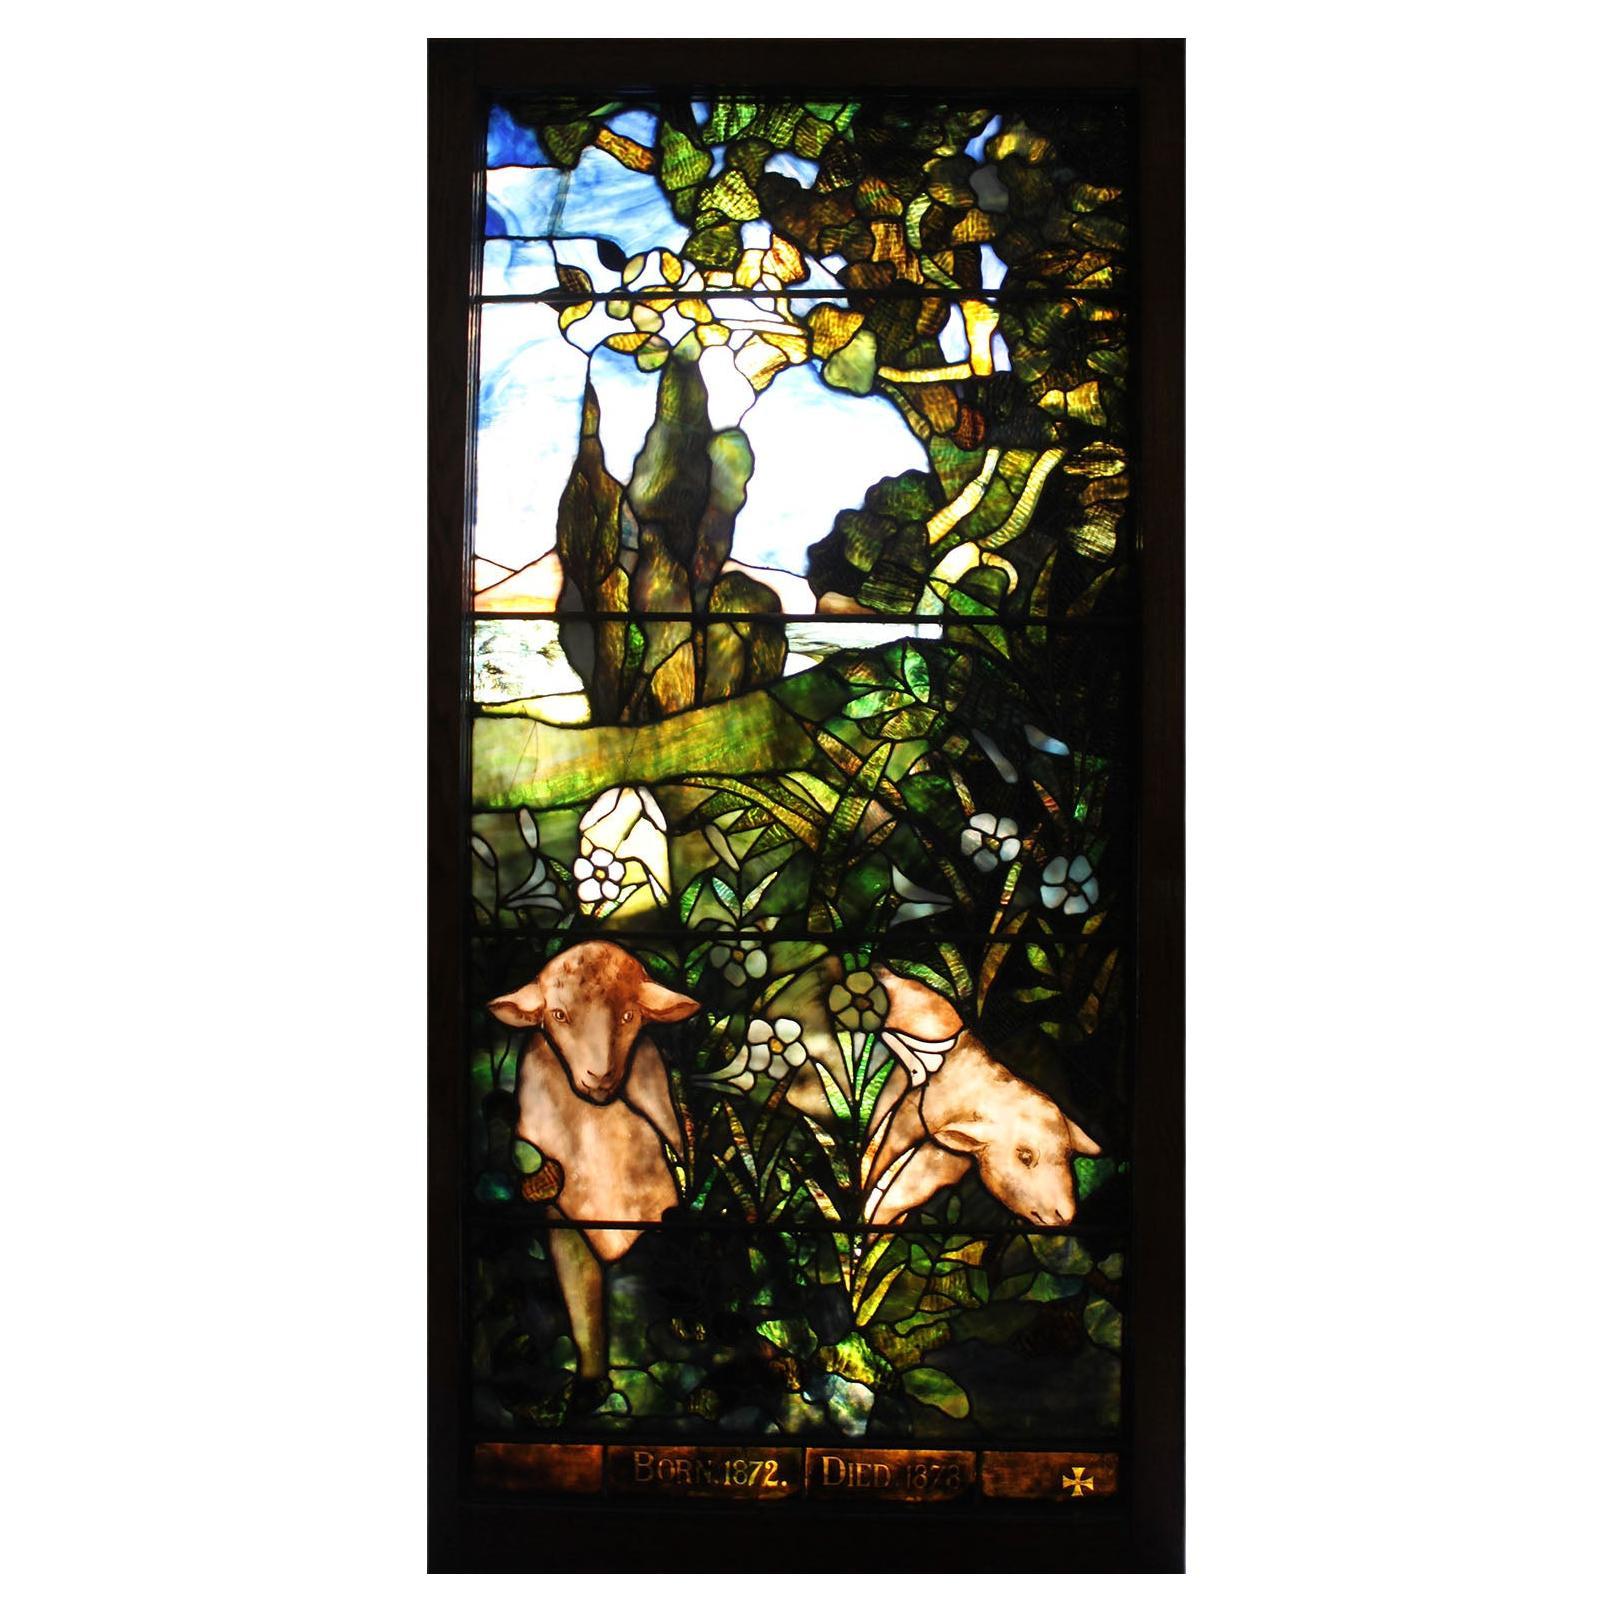 What era was most famous for stained glass windows?